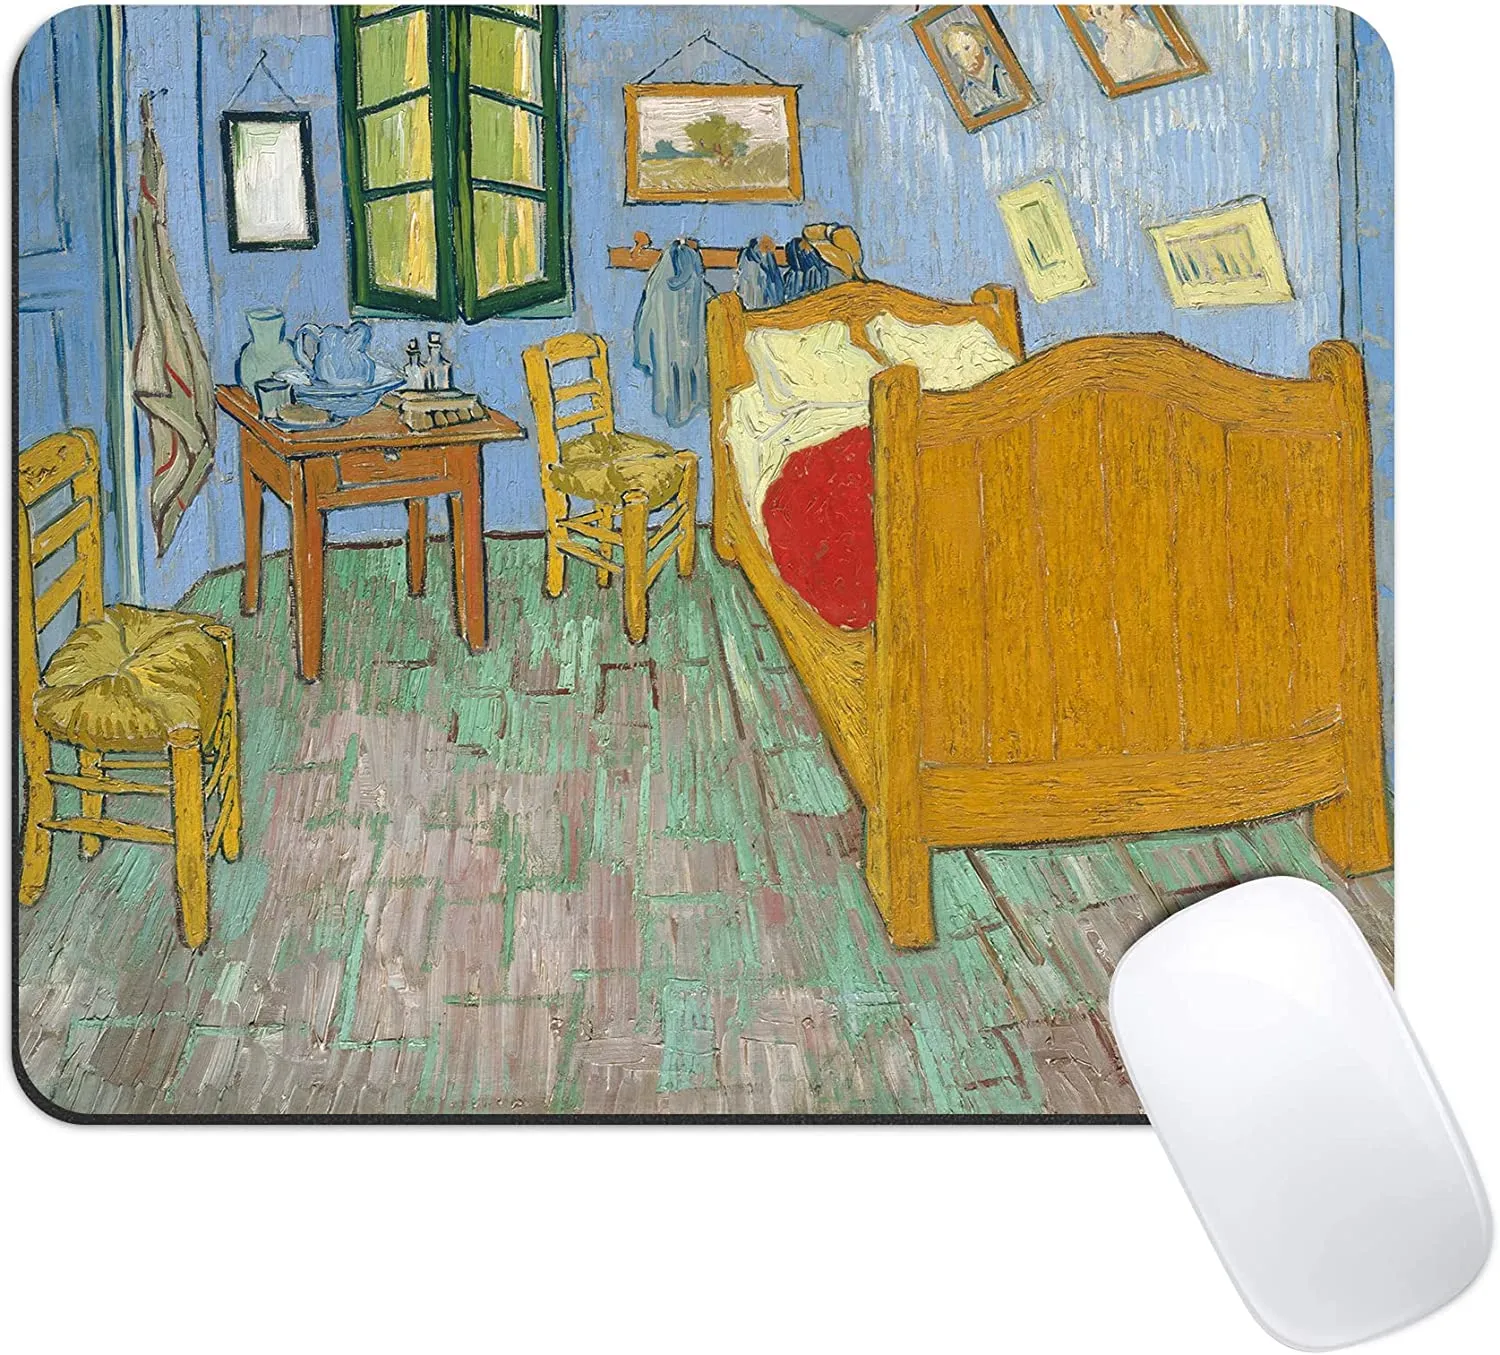 Upgraded Mouse Pad Gaming Mouse Pads Non-Slip Rubber Base Mousepad Rectangular Mouse Mat 11.8x9.8x0.12 Inches Bedroom in Arles